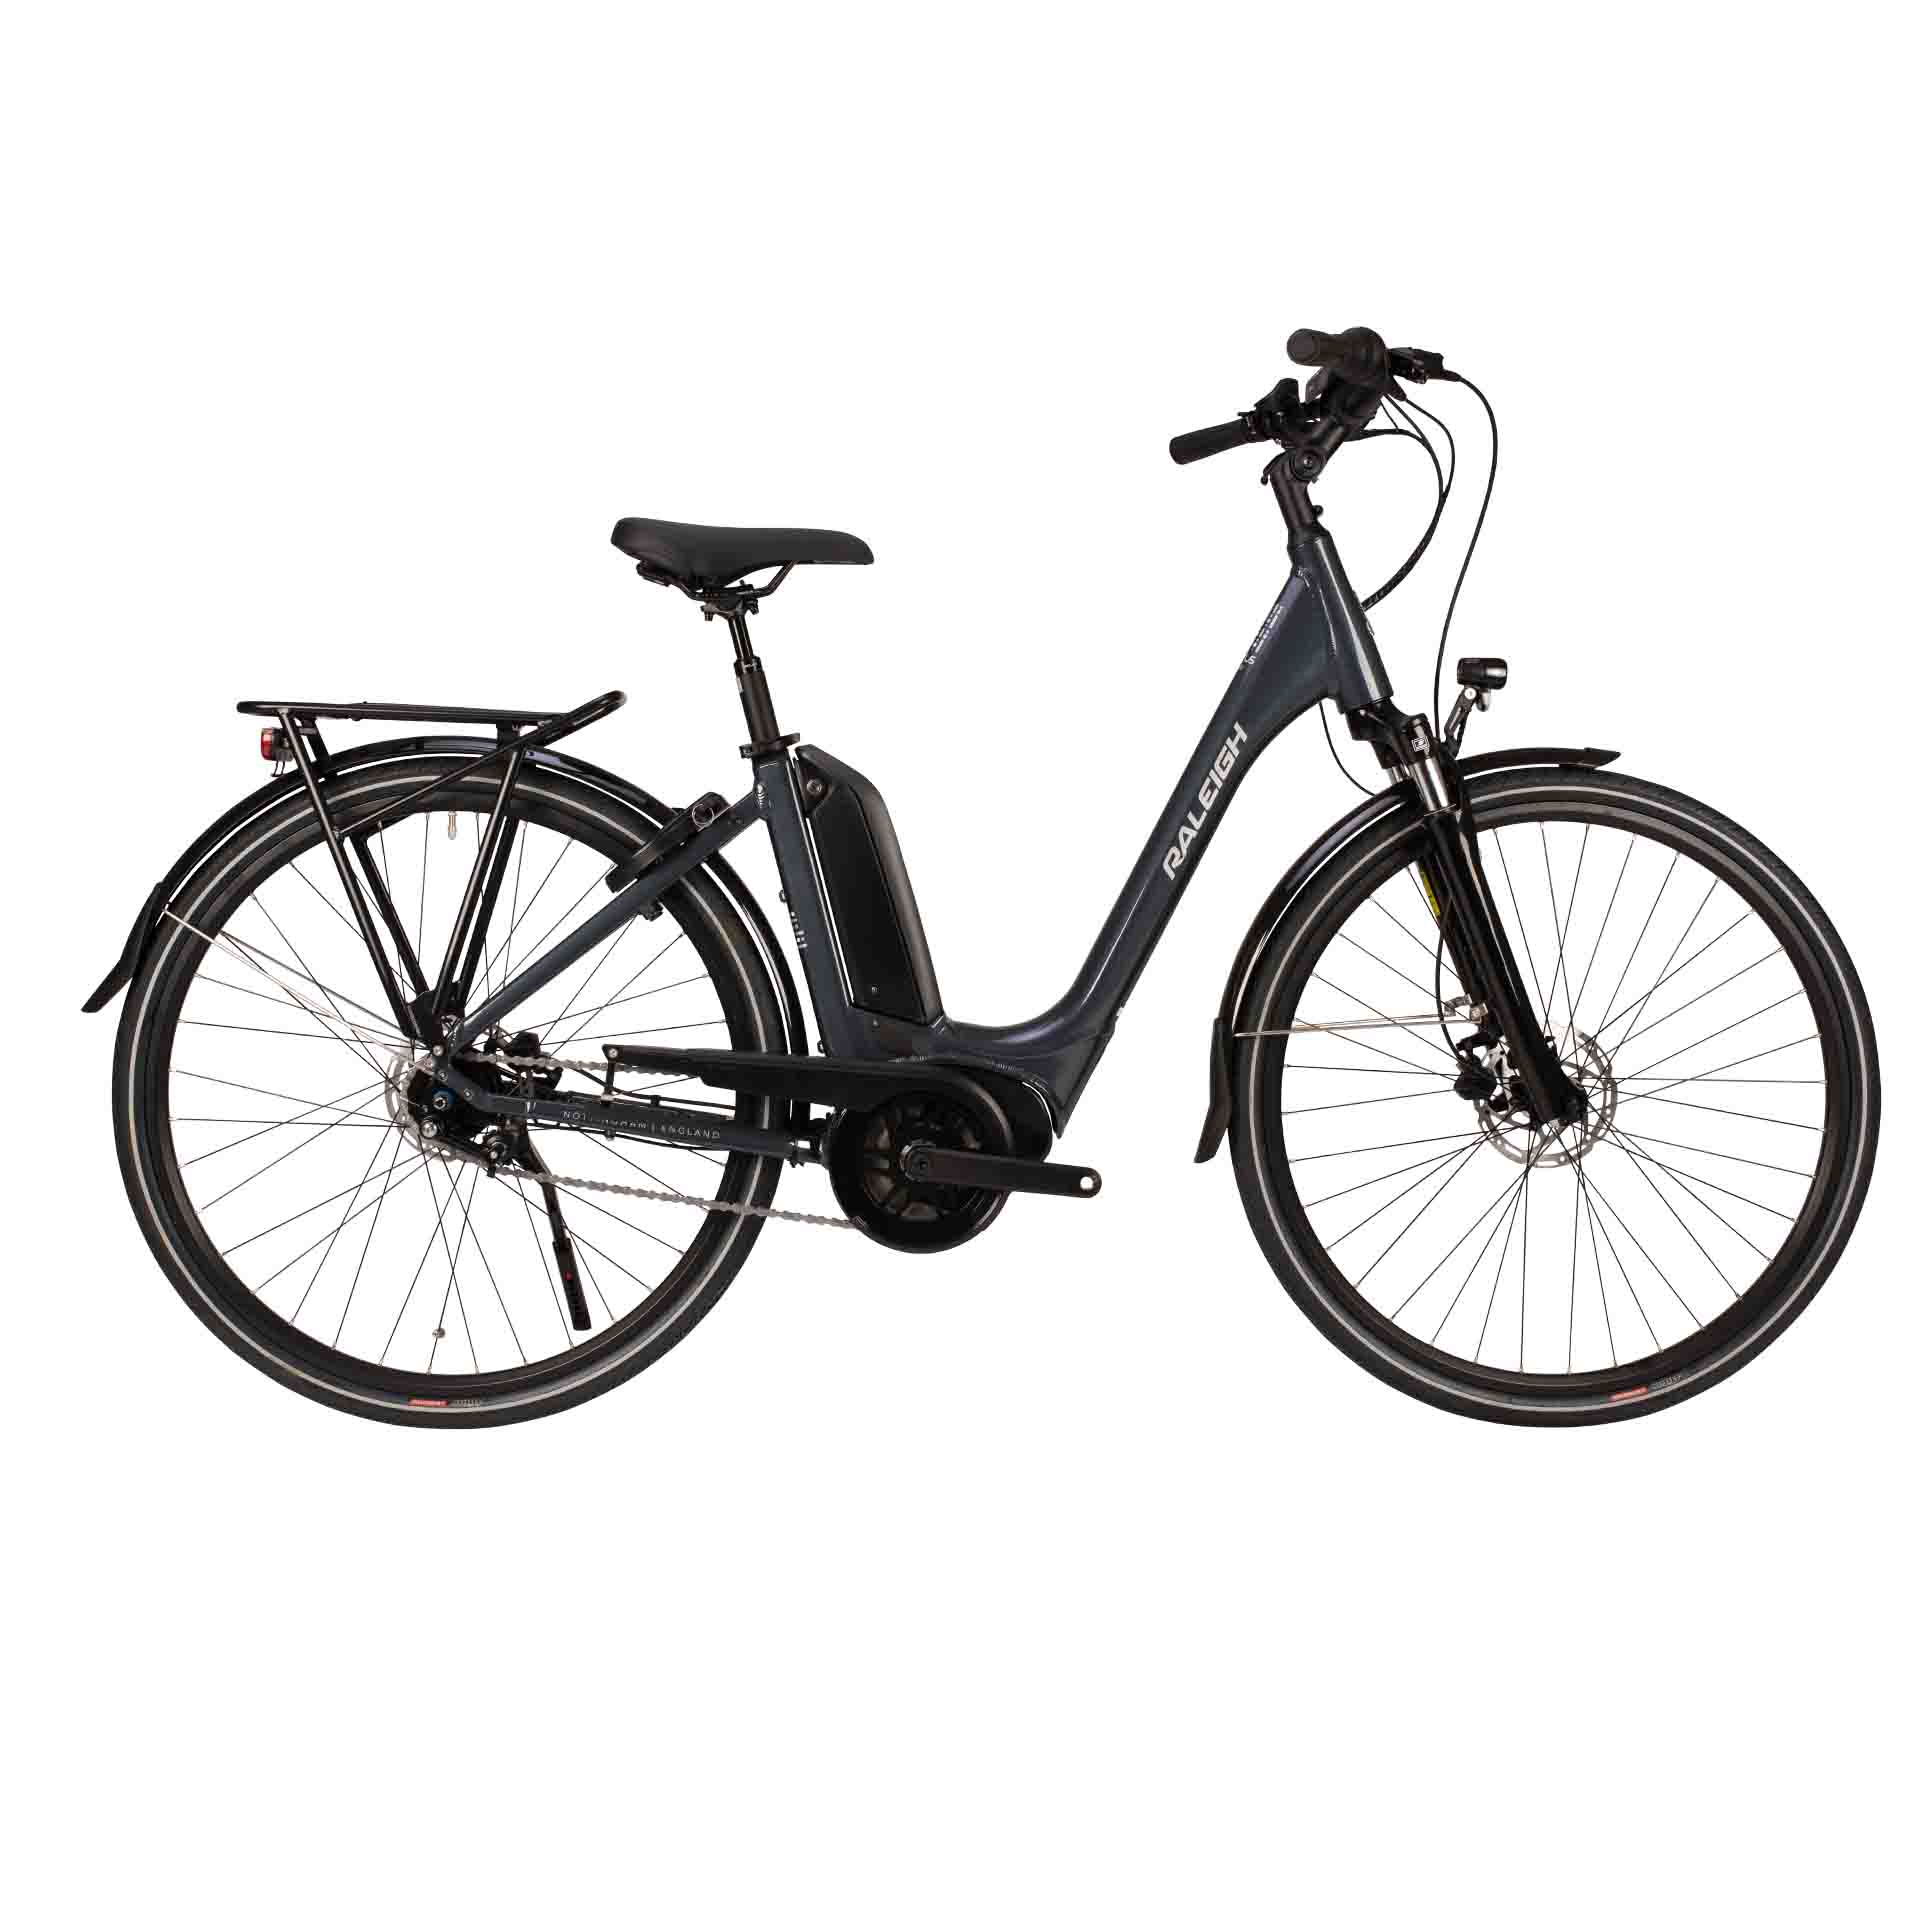 Raleigh Motus Tour Ebike - Powered By Bosch Active